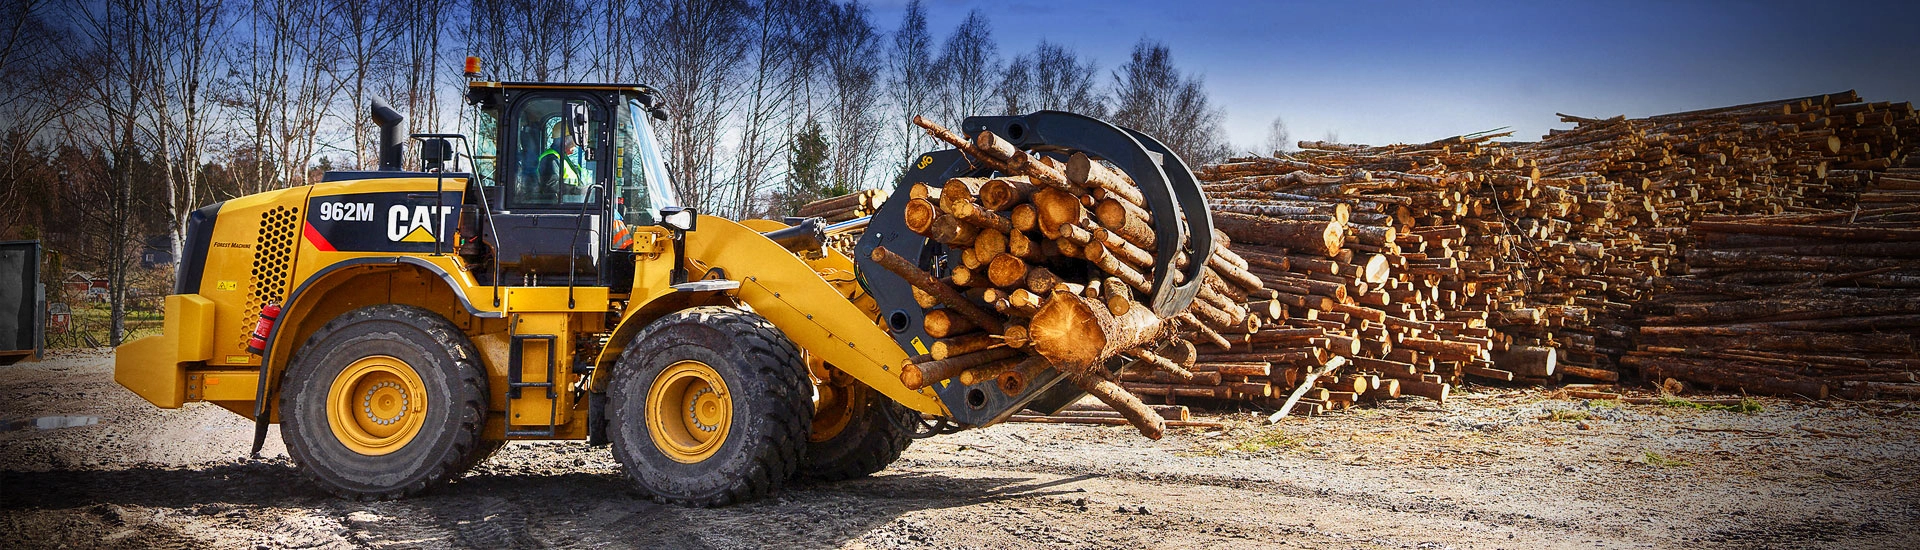 equipment management software for heavy machinery carrying large wood logs